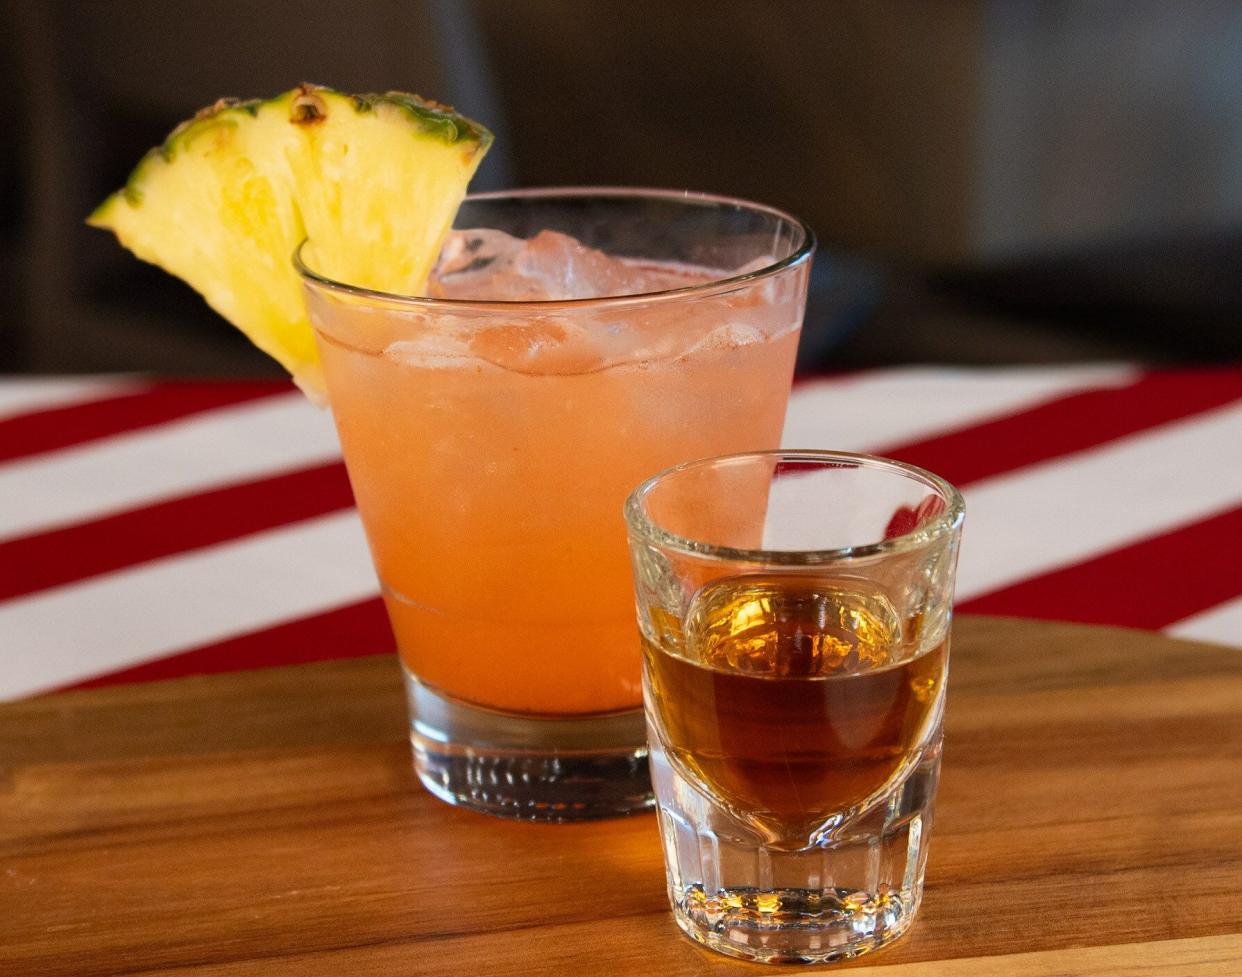 The Tax Break Drink at TGI Fridays is available through April 30.